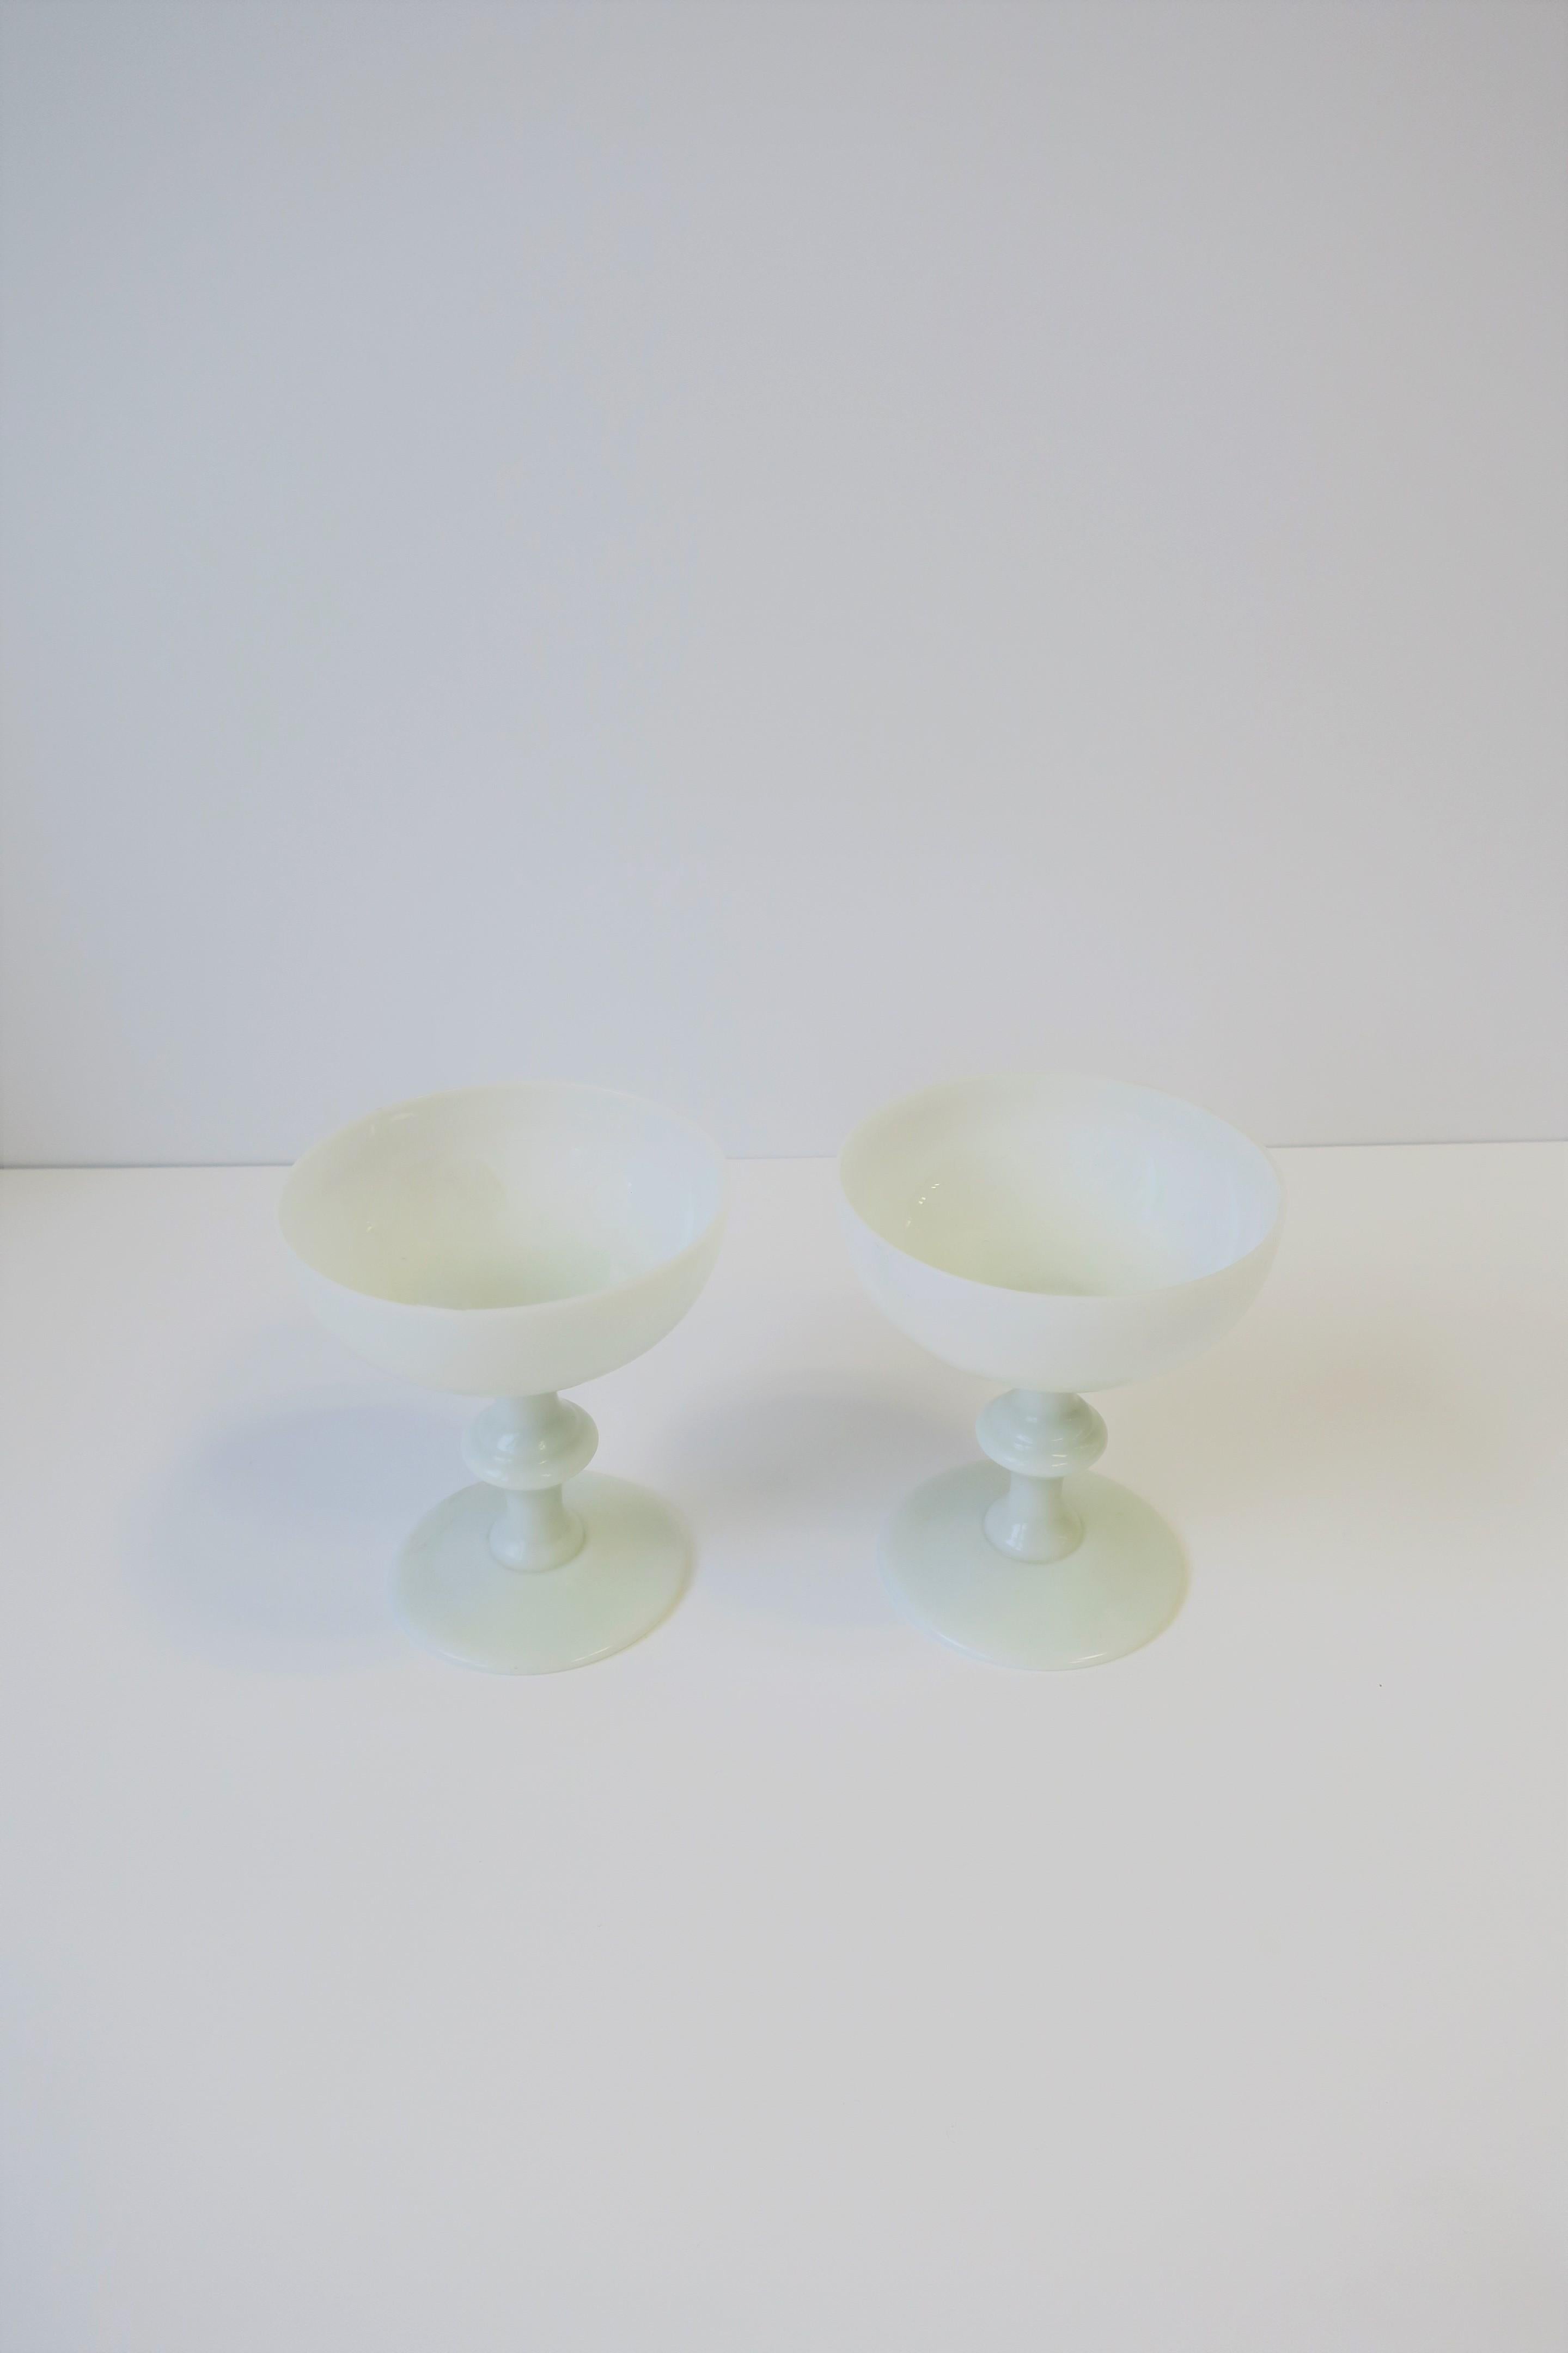 French White Opaline Champagne Glasses by Portieux Vallerysthal 3